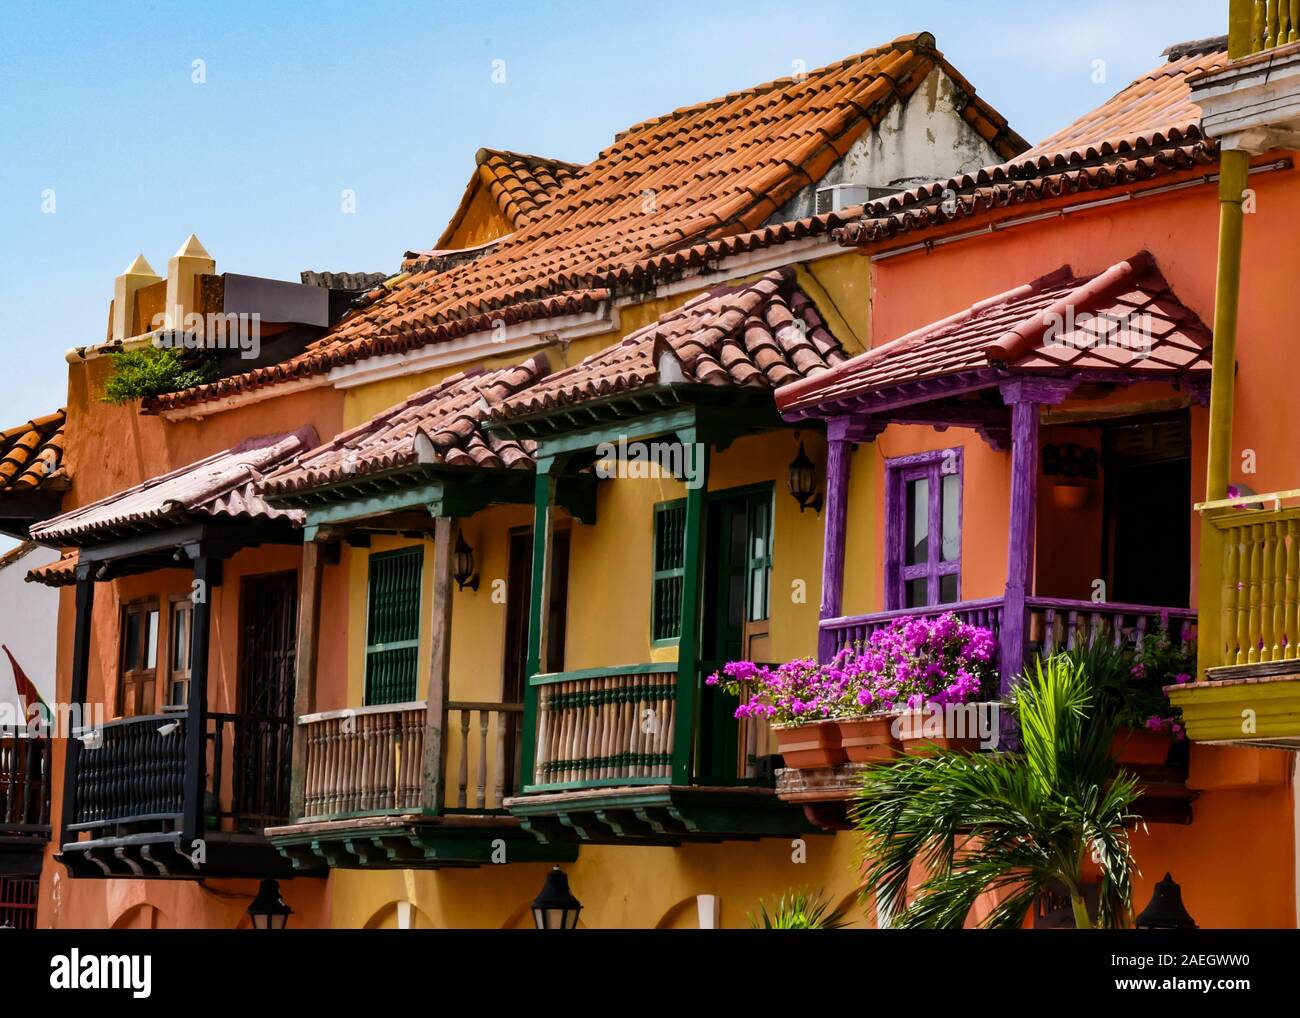 Beautiful and colorful architecture in the Plaza de los Coches in Cartagena. Cute balconies with flowers Stock Photo